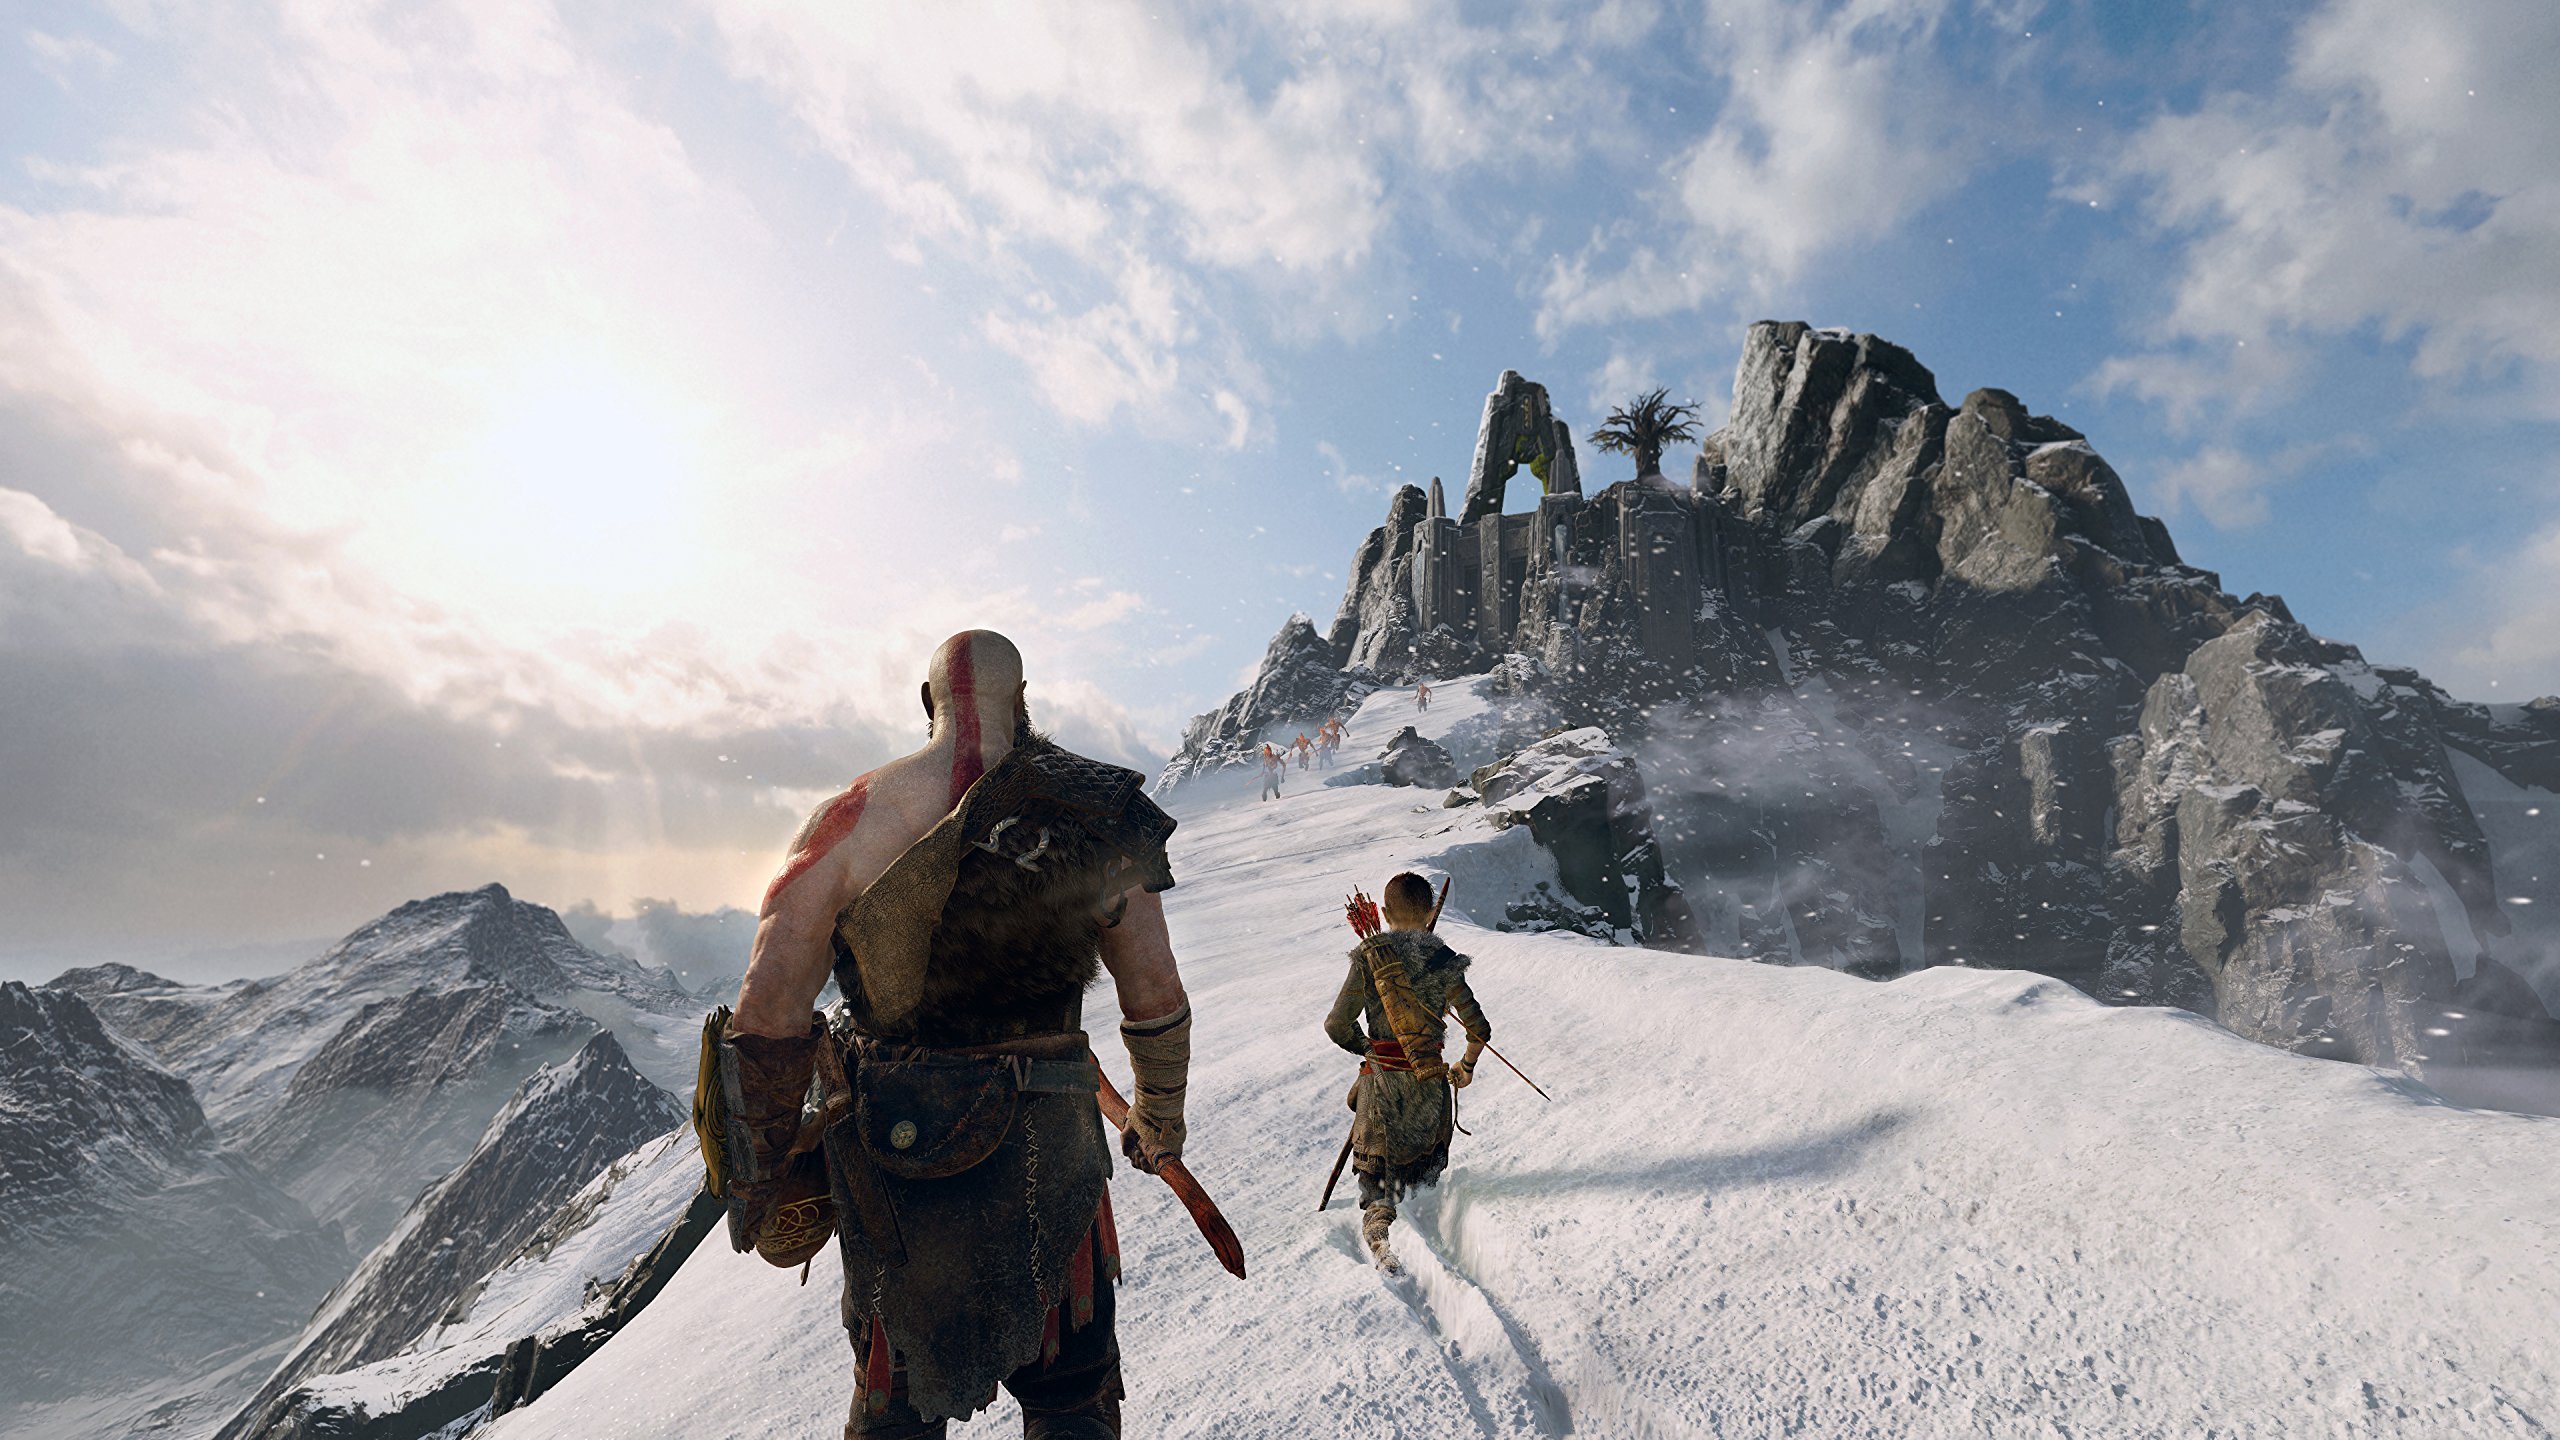 God of War (PS4 / Playstation 4) Journey to a dark, elemental world of fearsome creatures - image 2 of 5